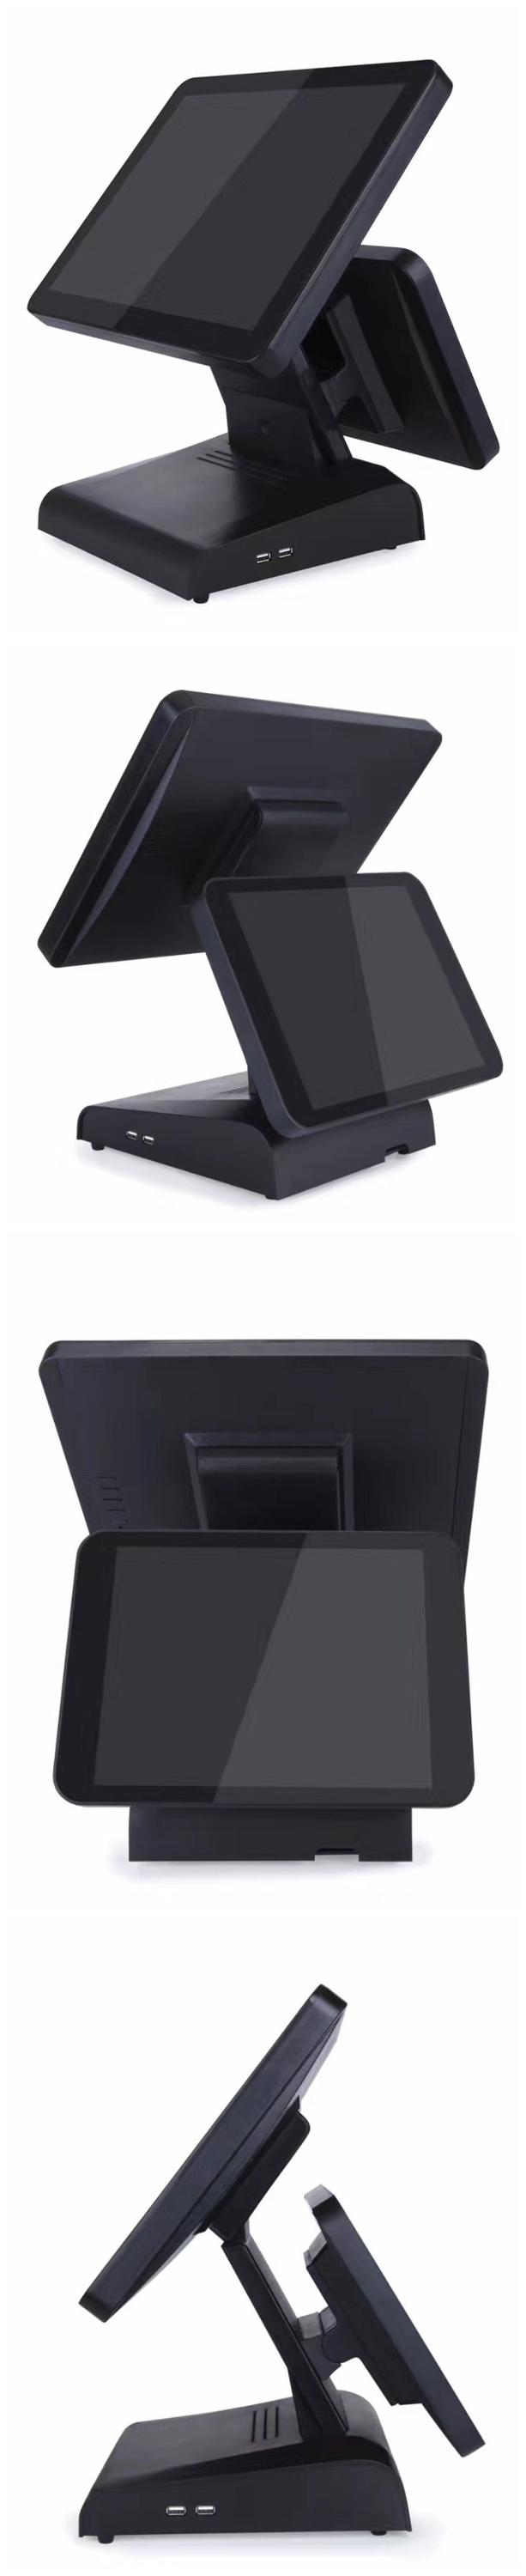 15 Inch Flat Panel Capacitive Touch Screen Dual Display POS Terminal Windows OS All In One POS System